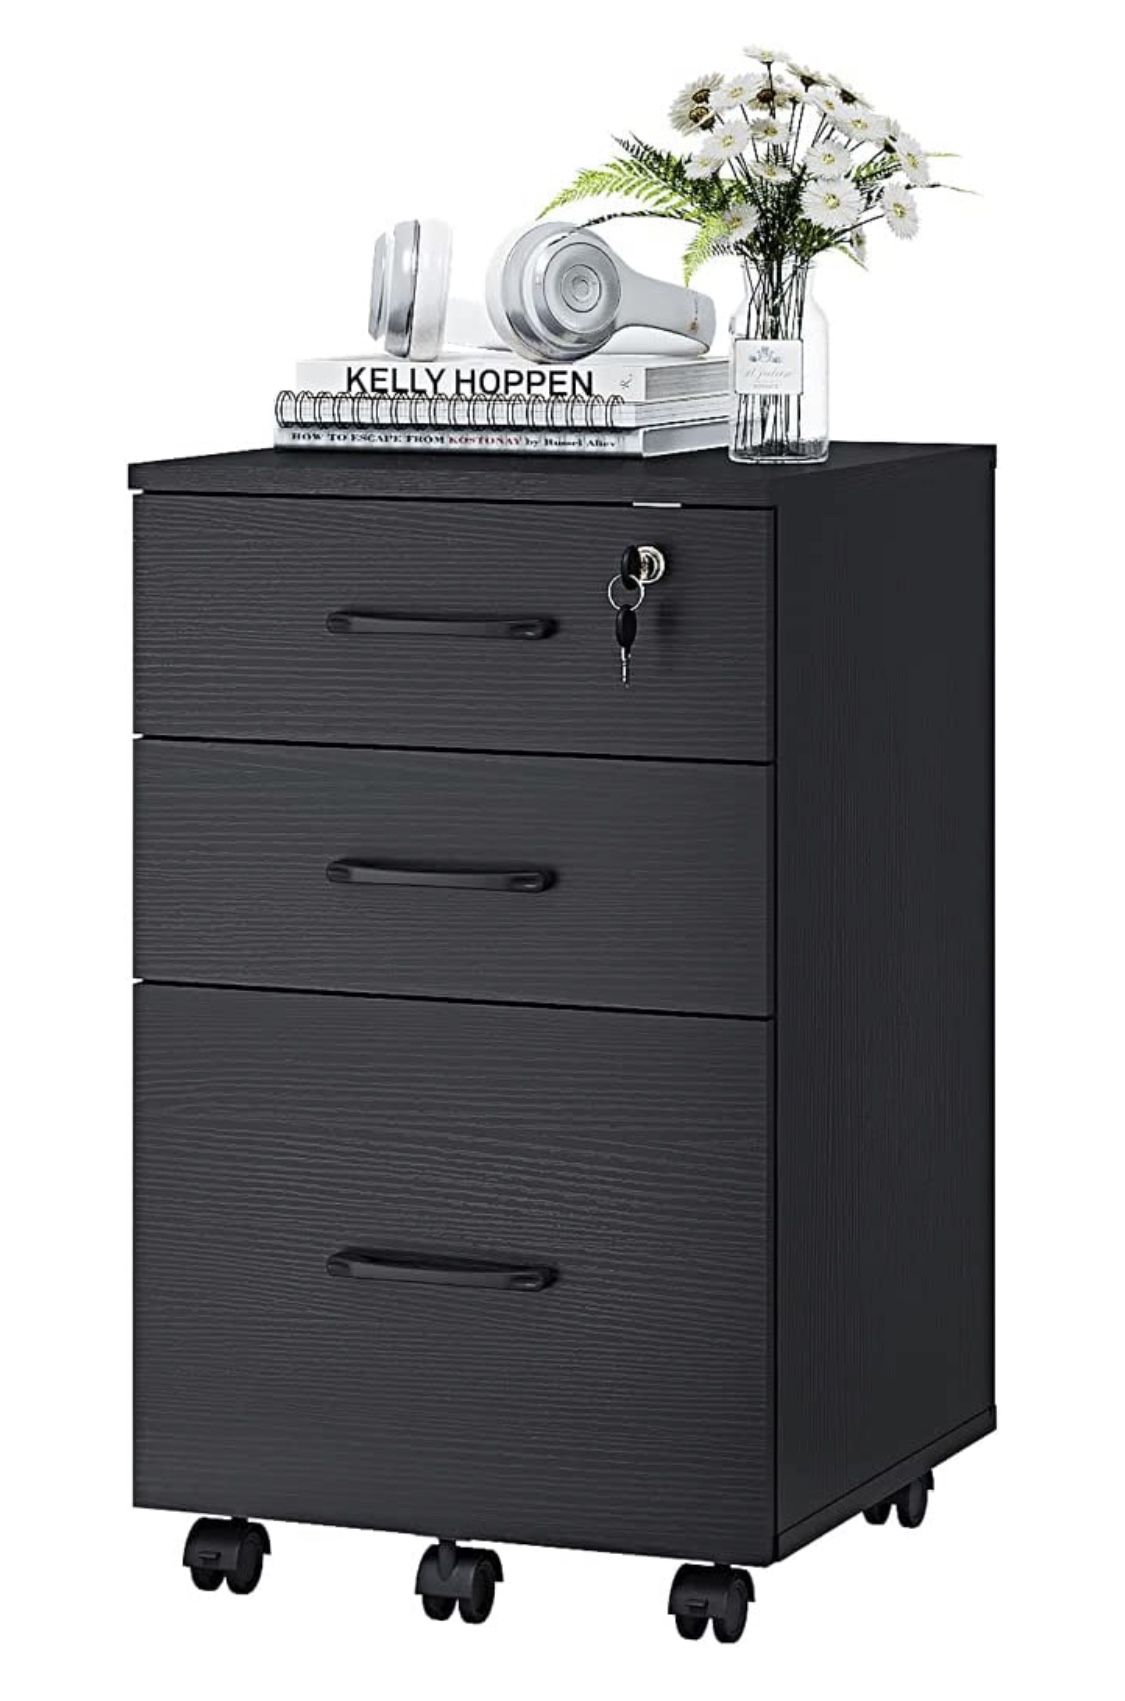 New 3 Drawer Wood Mobile File Cabinet